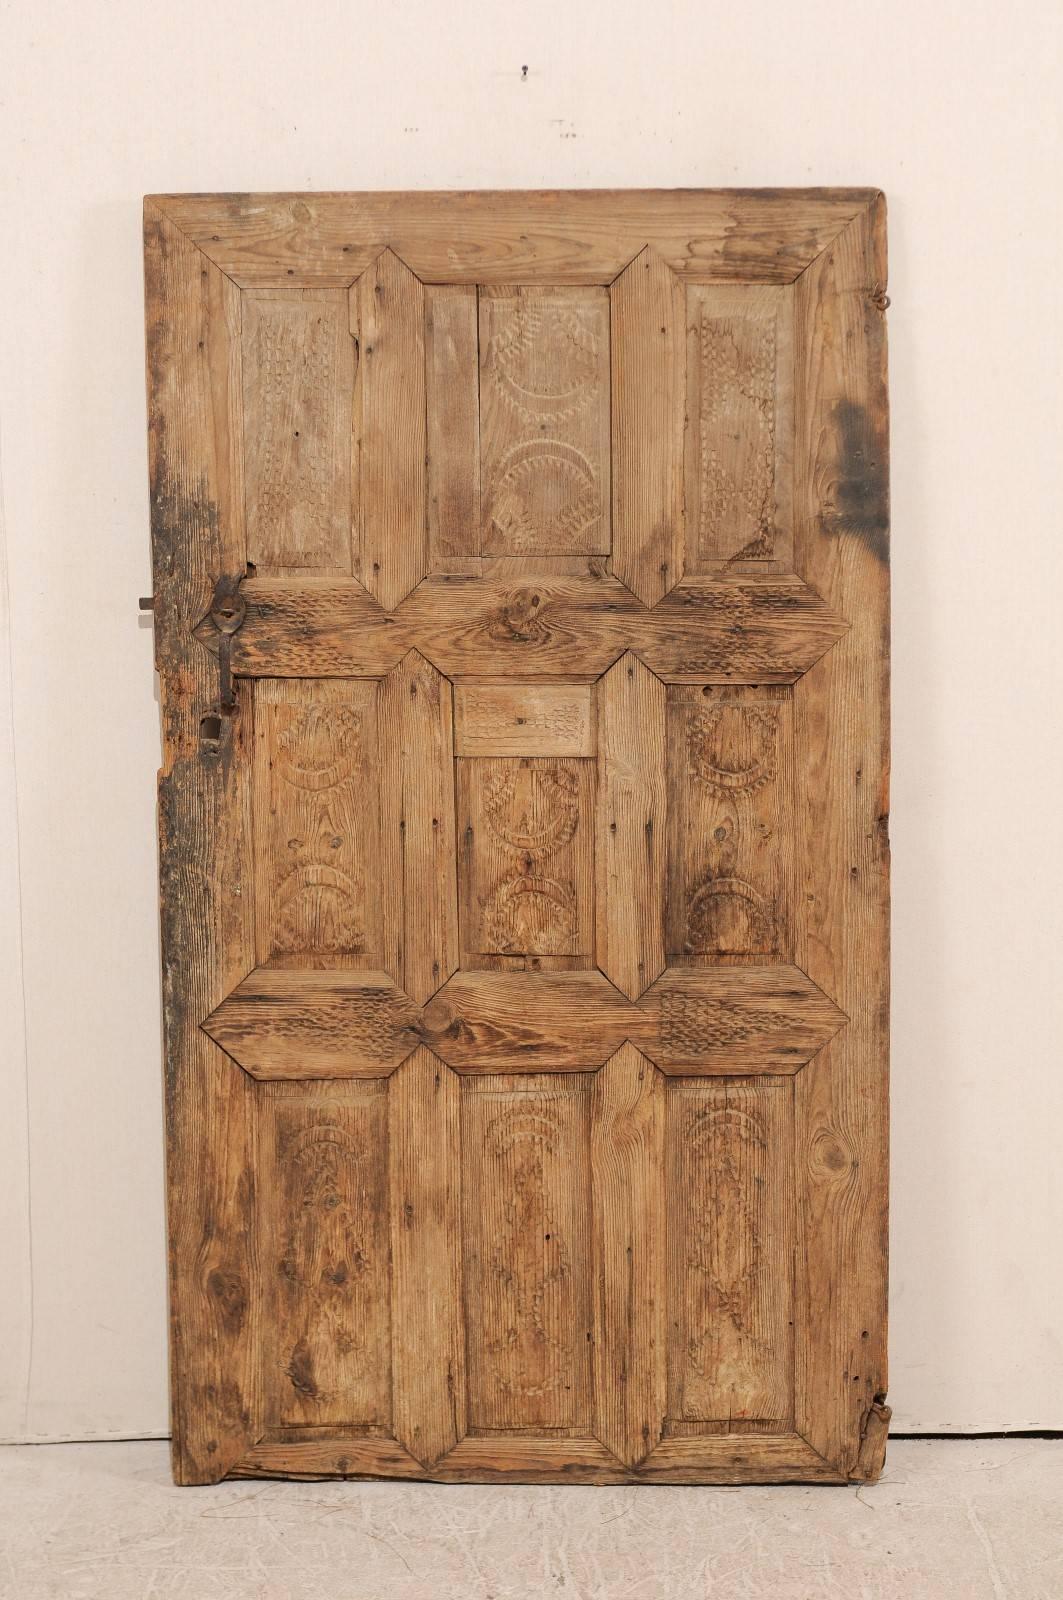 A single European 19th century nine panel wood door. This cute little door features a nine panel front which has been adorn within each recessed panel and two center rails with a series of rustically chiselled designs. The door has a natural wood